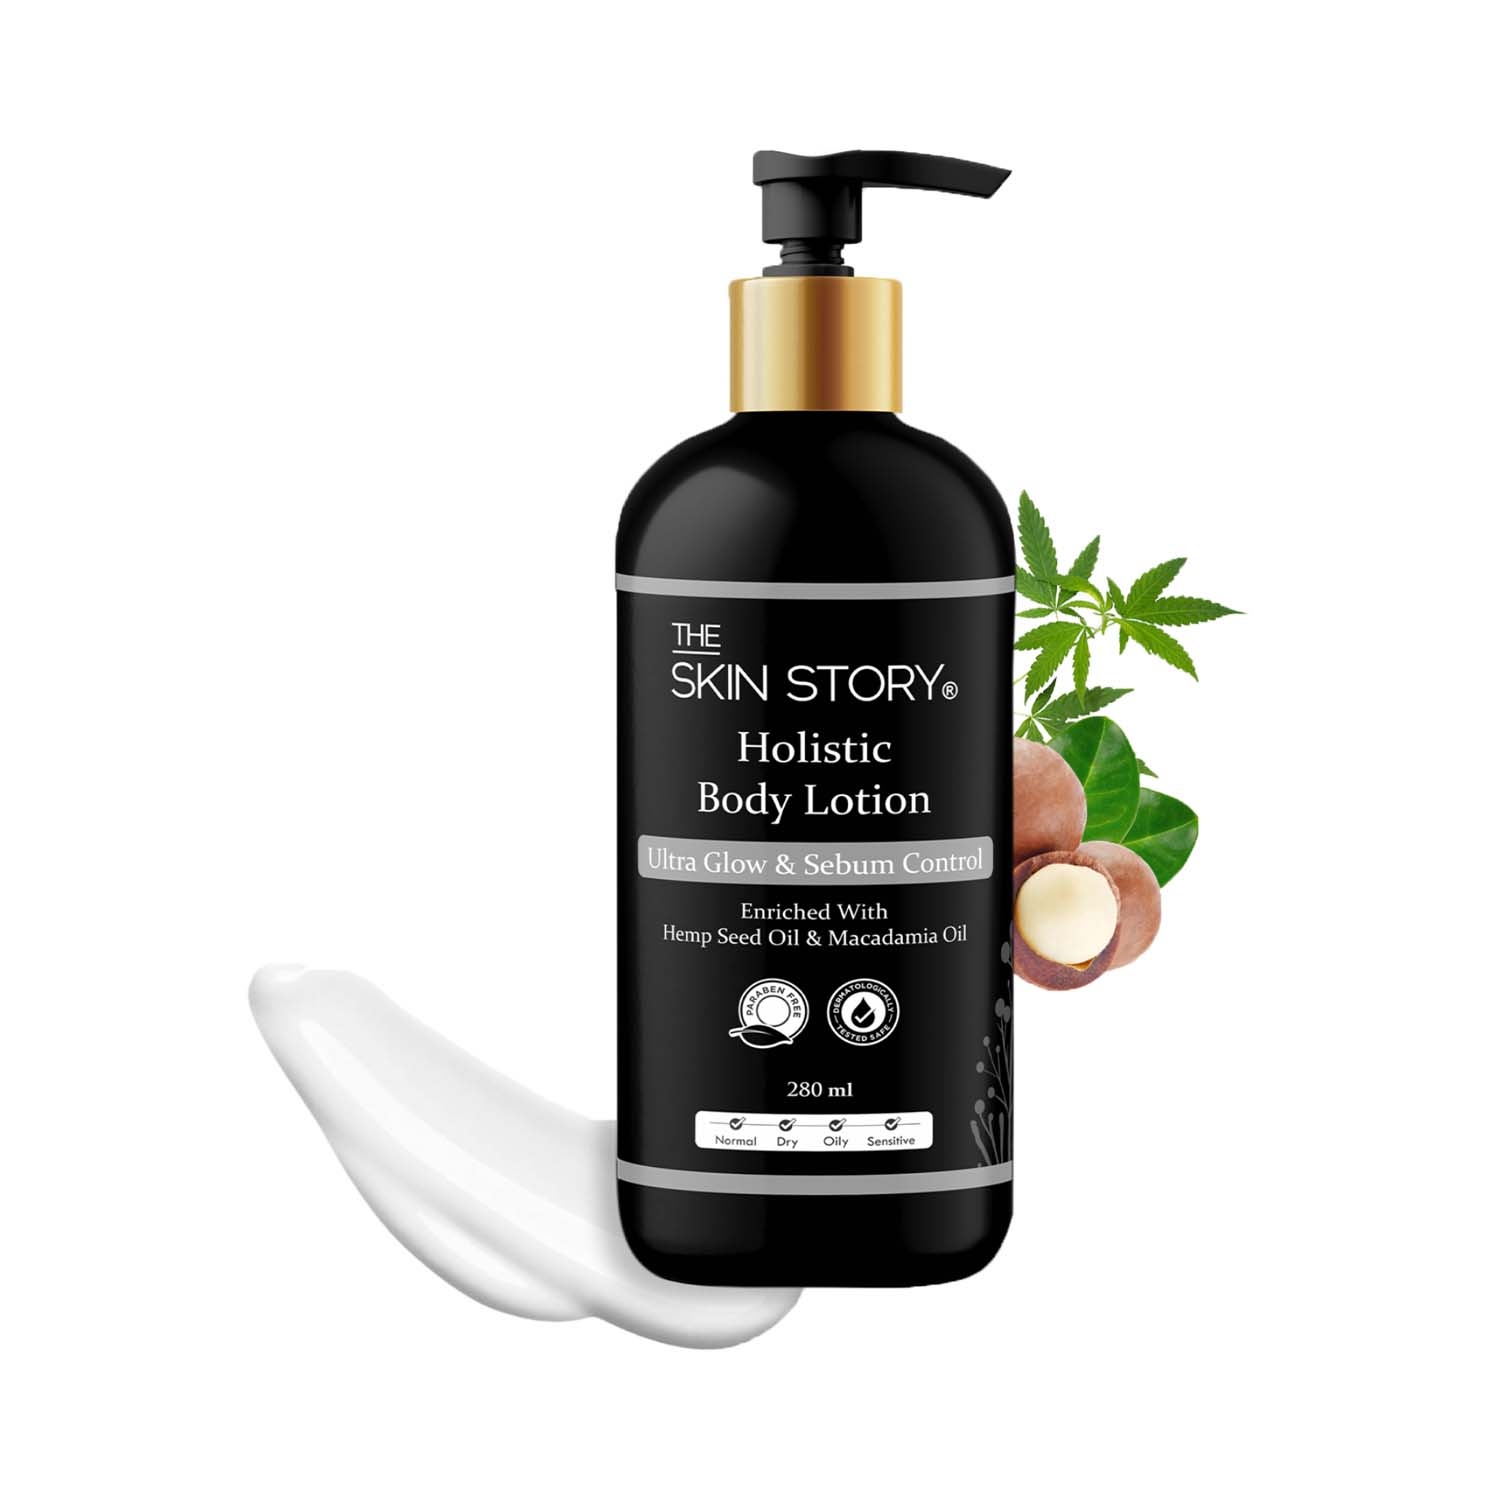 The Skin Story Holistic Body Lotion (280ml)